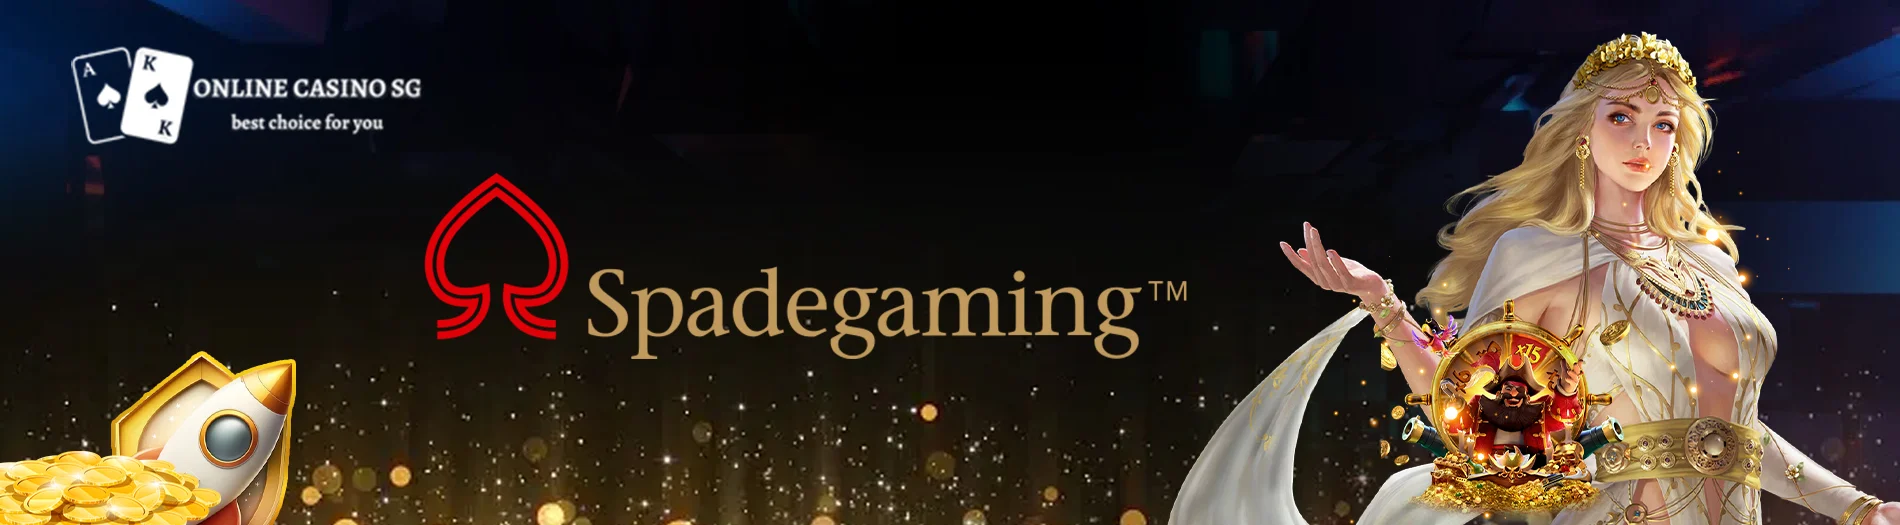 One of the best slots provider in Singapore, Spadegaming Singapore.